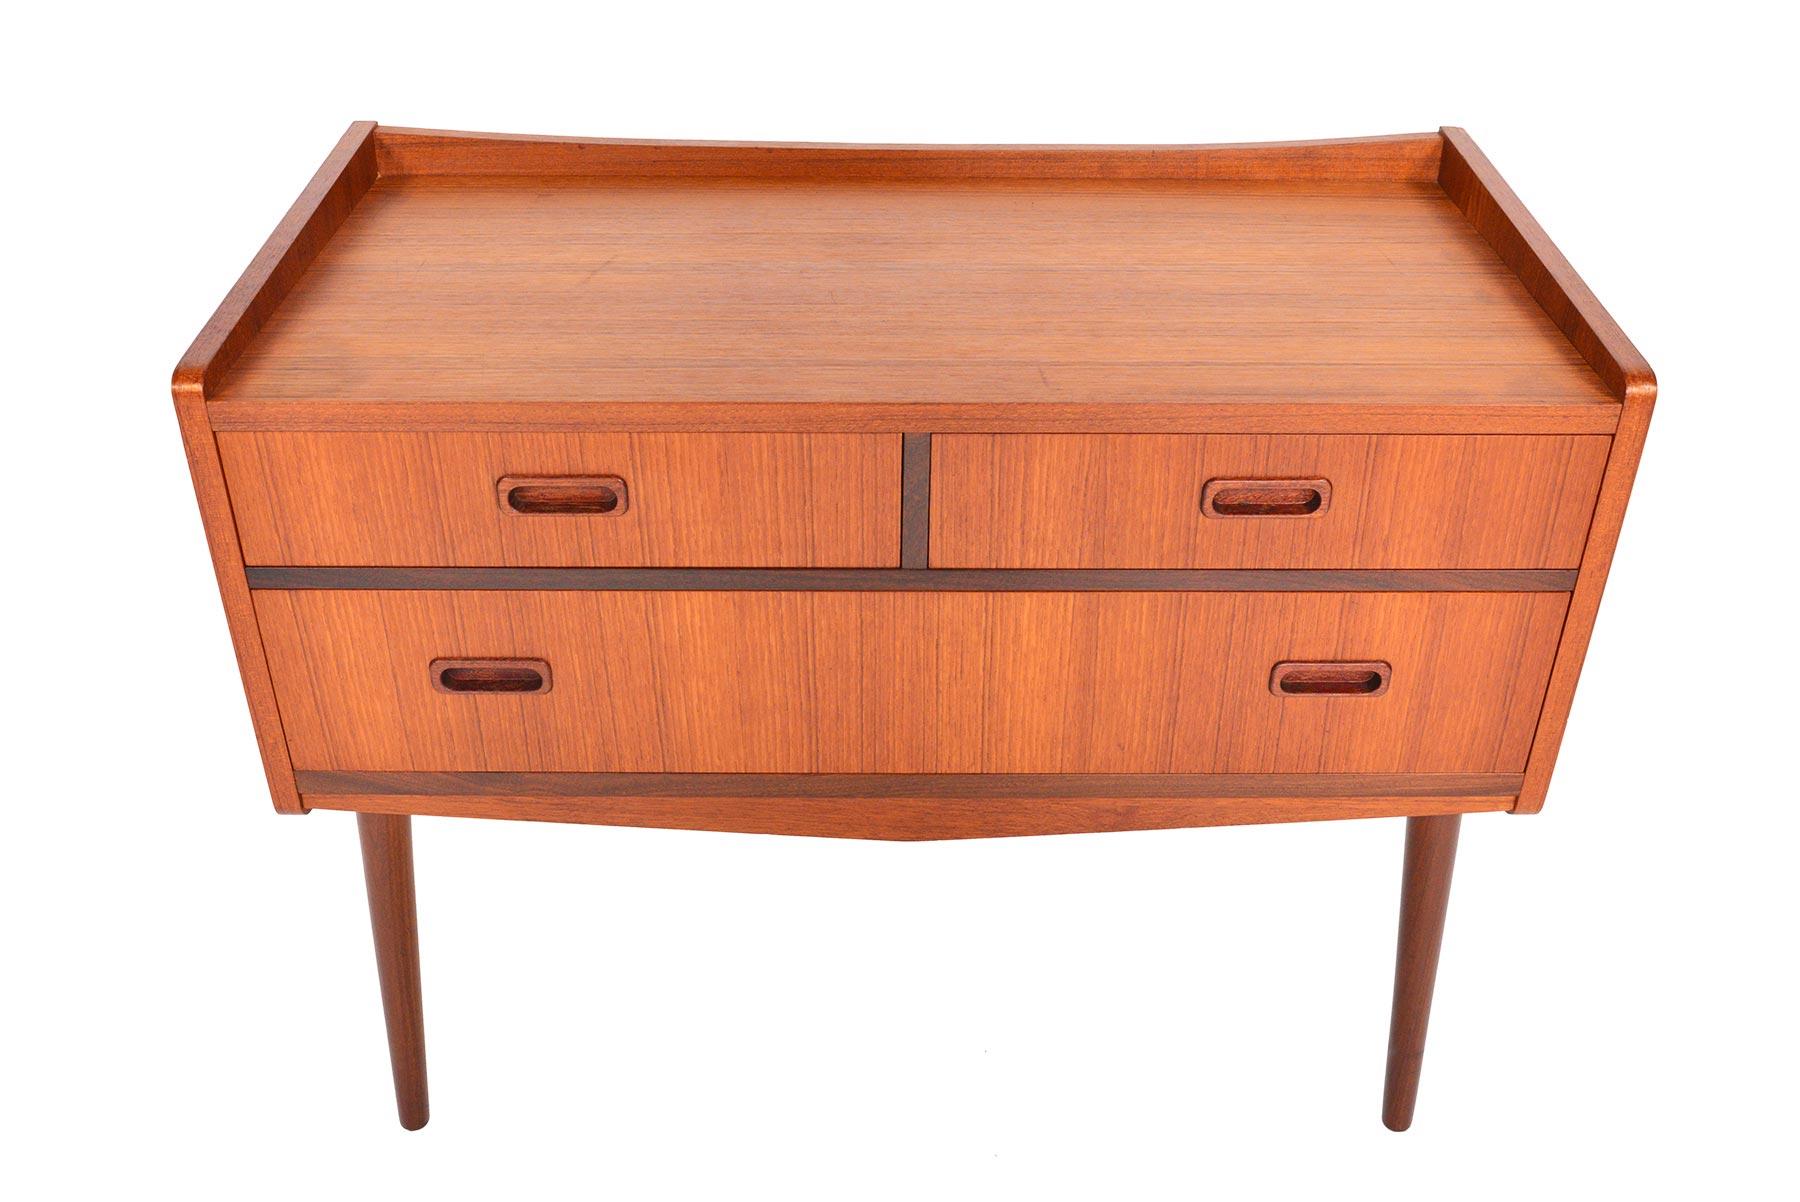 Wide and tall, this Danish modern teak chest offers an unusual footprint perfect for modern interiors! Banding and pulls are crafted from beautifully contrasting afromosia. Three drawers sit an atomic case and stand on canted legs. In excellent